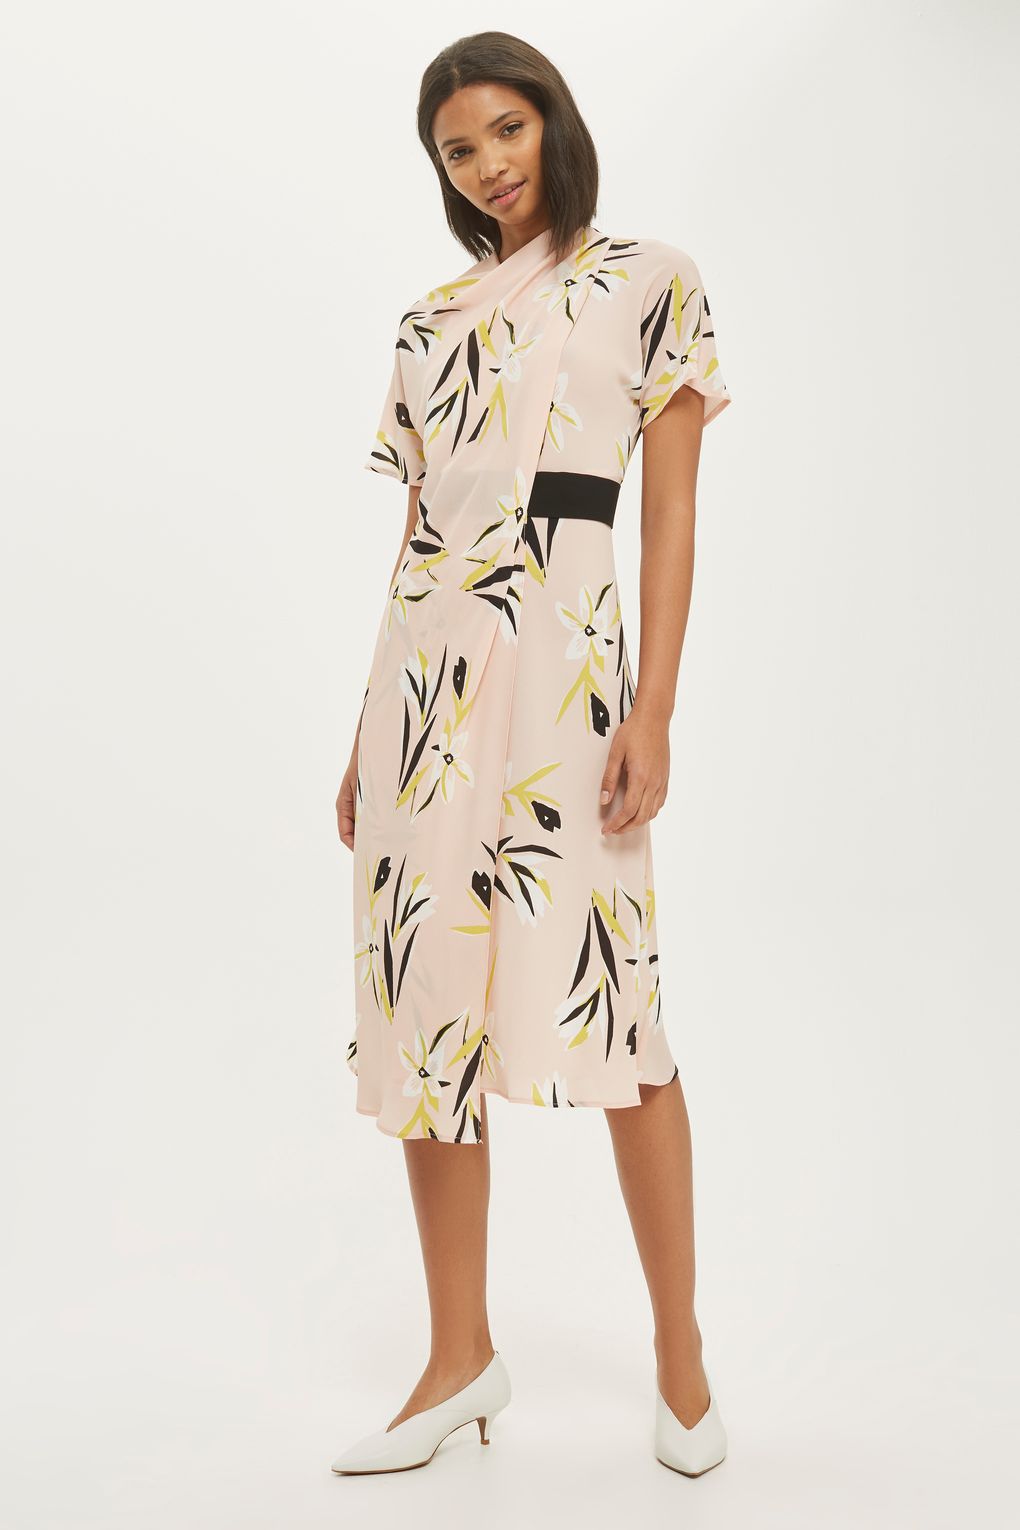 Topshop Tall Origami Dress - Rock My Style